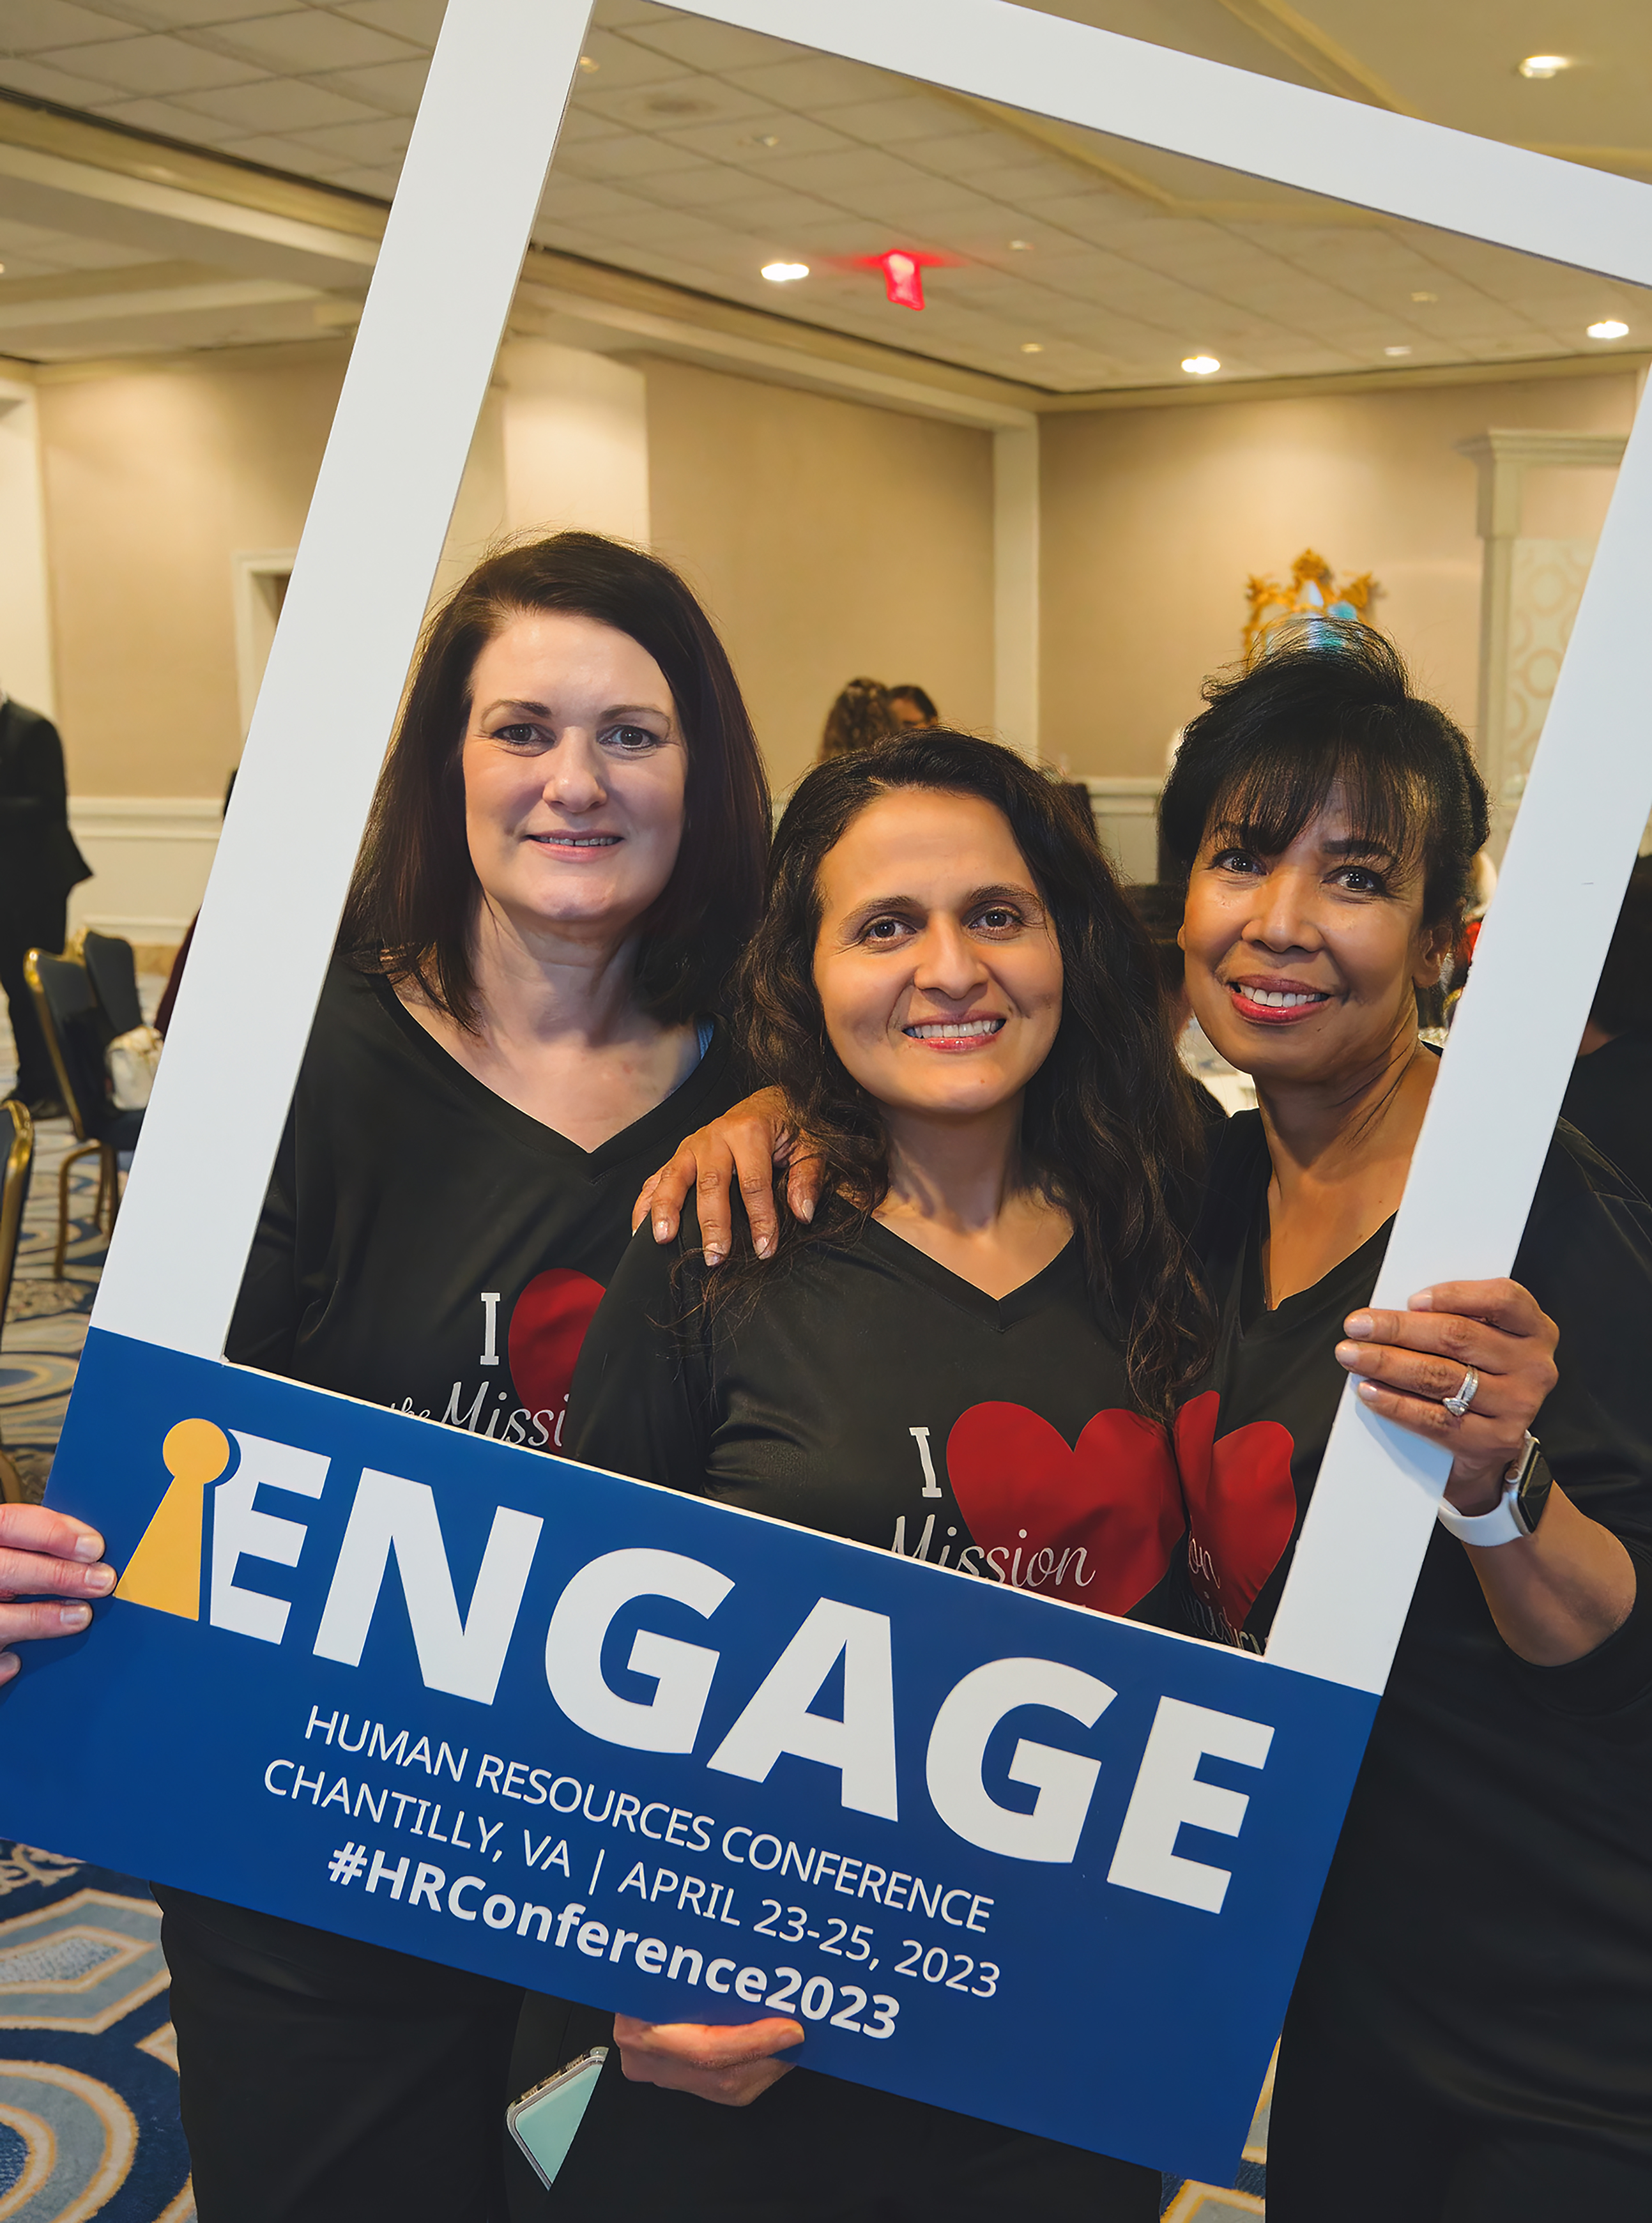 Three woman standing with a big cardboard frame that reads "Engage"